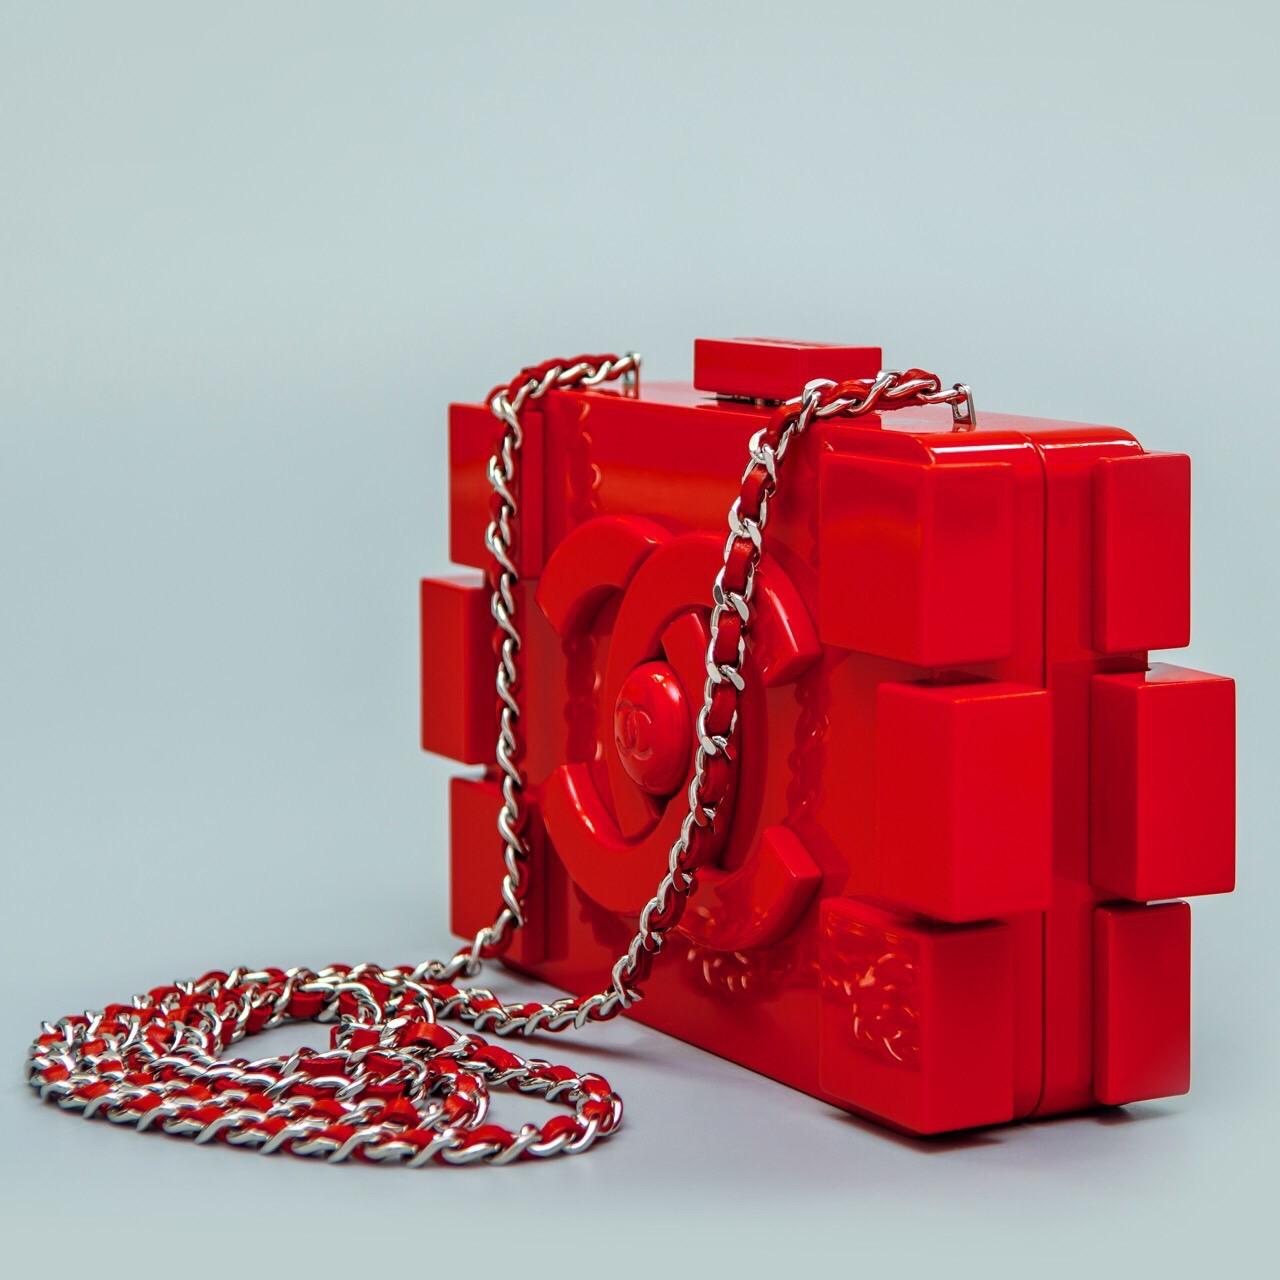 Get your hands on this truly exclusive handbag by Chanel. This Lego Brique bag is made from plexiglass, making it durable, chic and elegant. The red color makes it super fabulous. This bag is versatile; it can be worn during nights out on the town